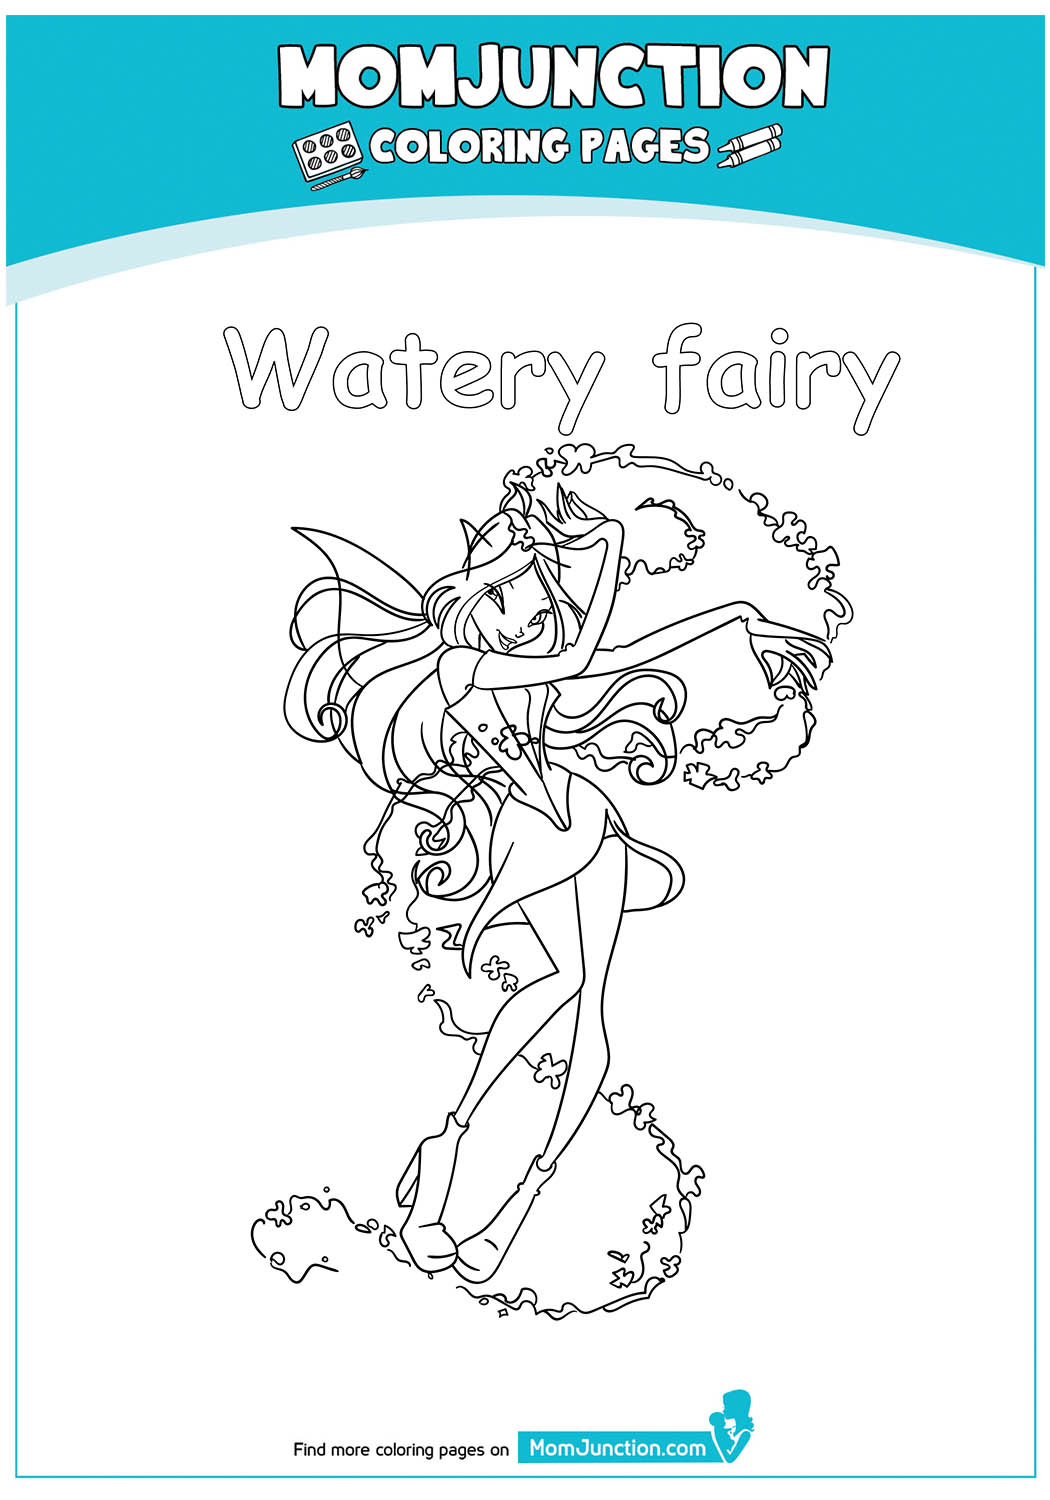 The-Watery-Fairy1-17